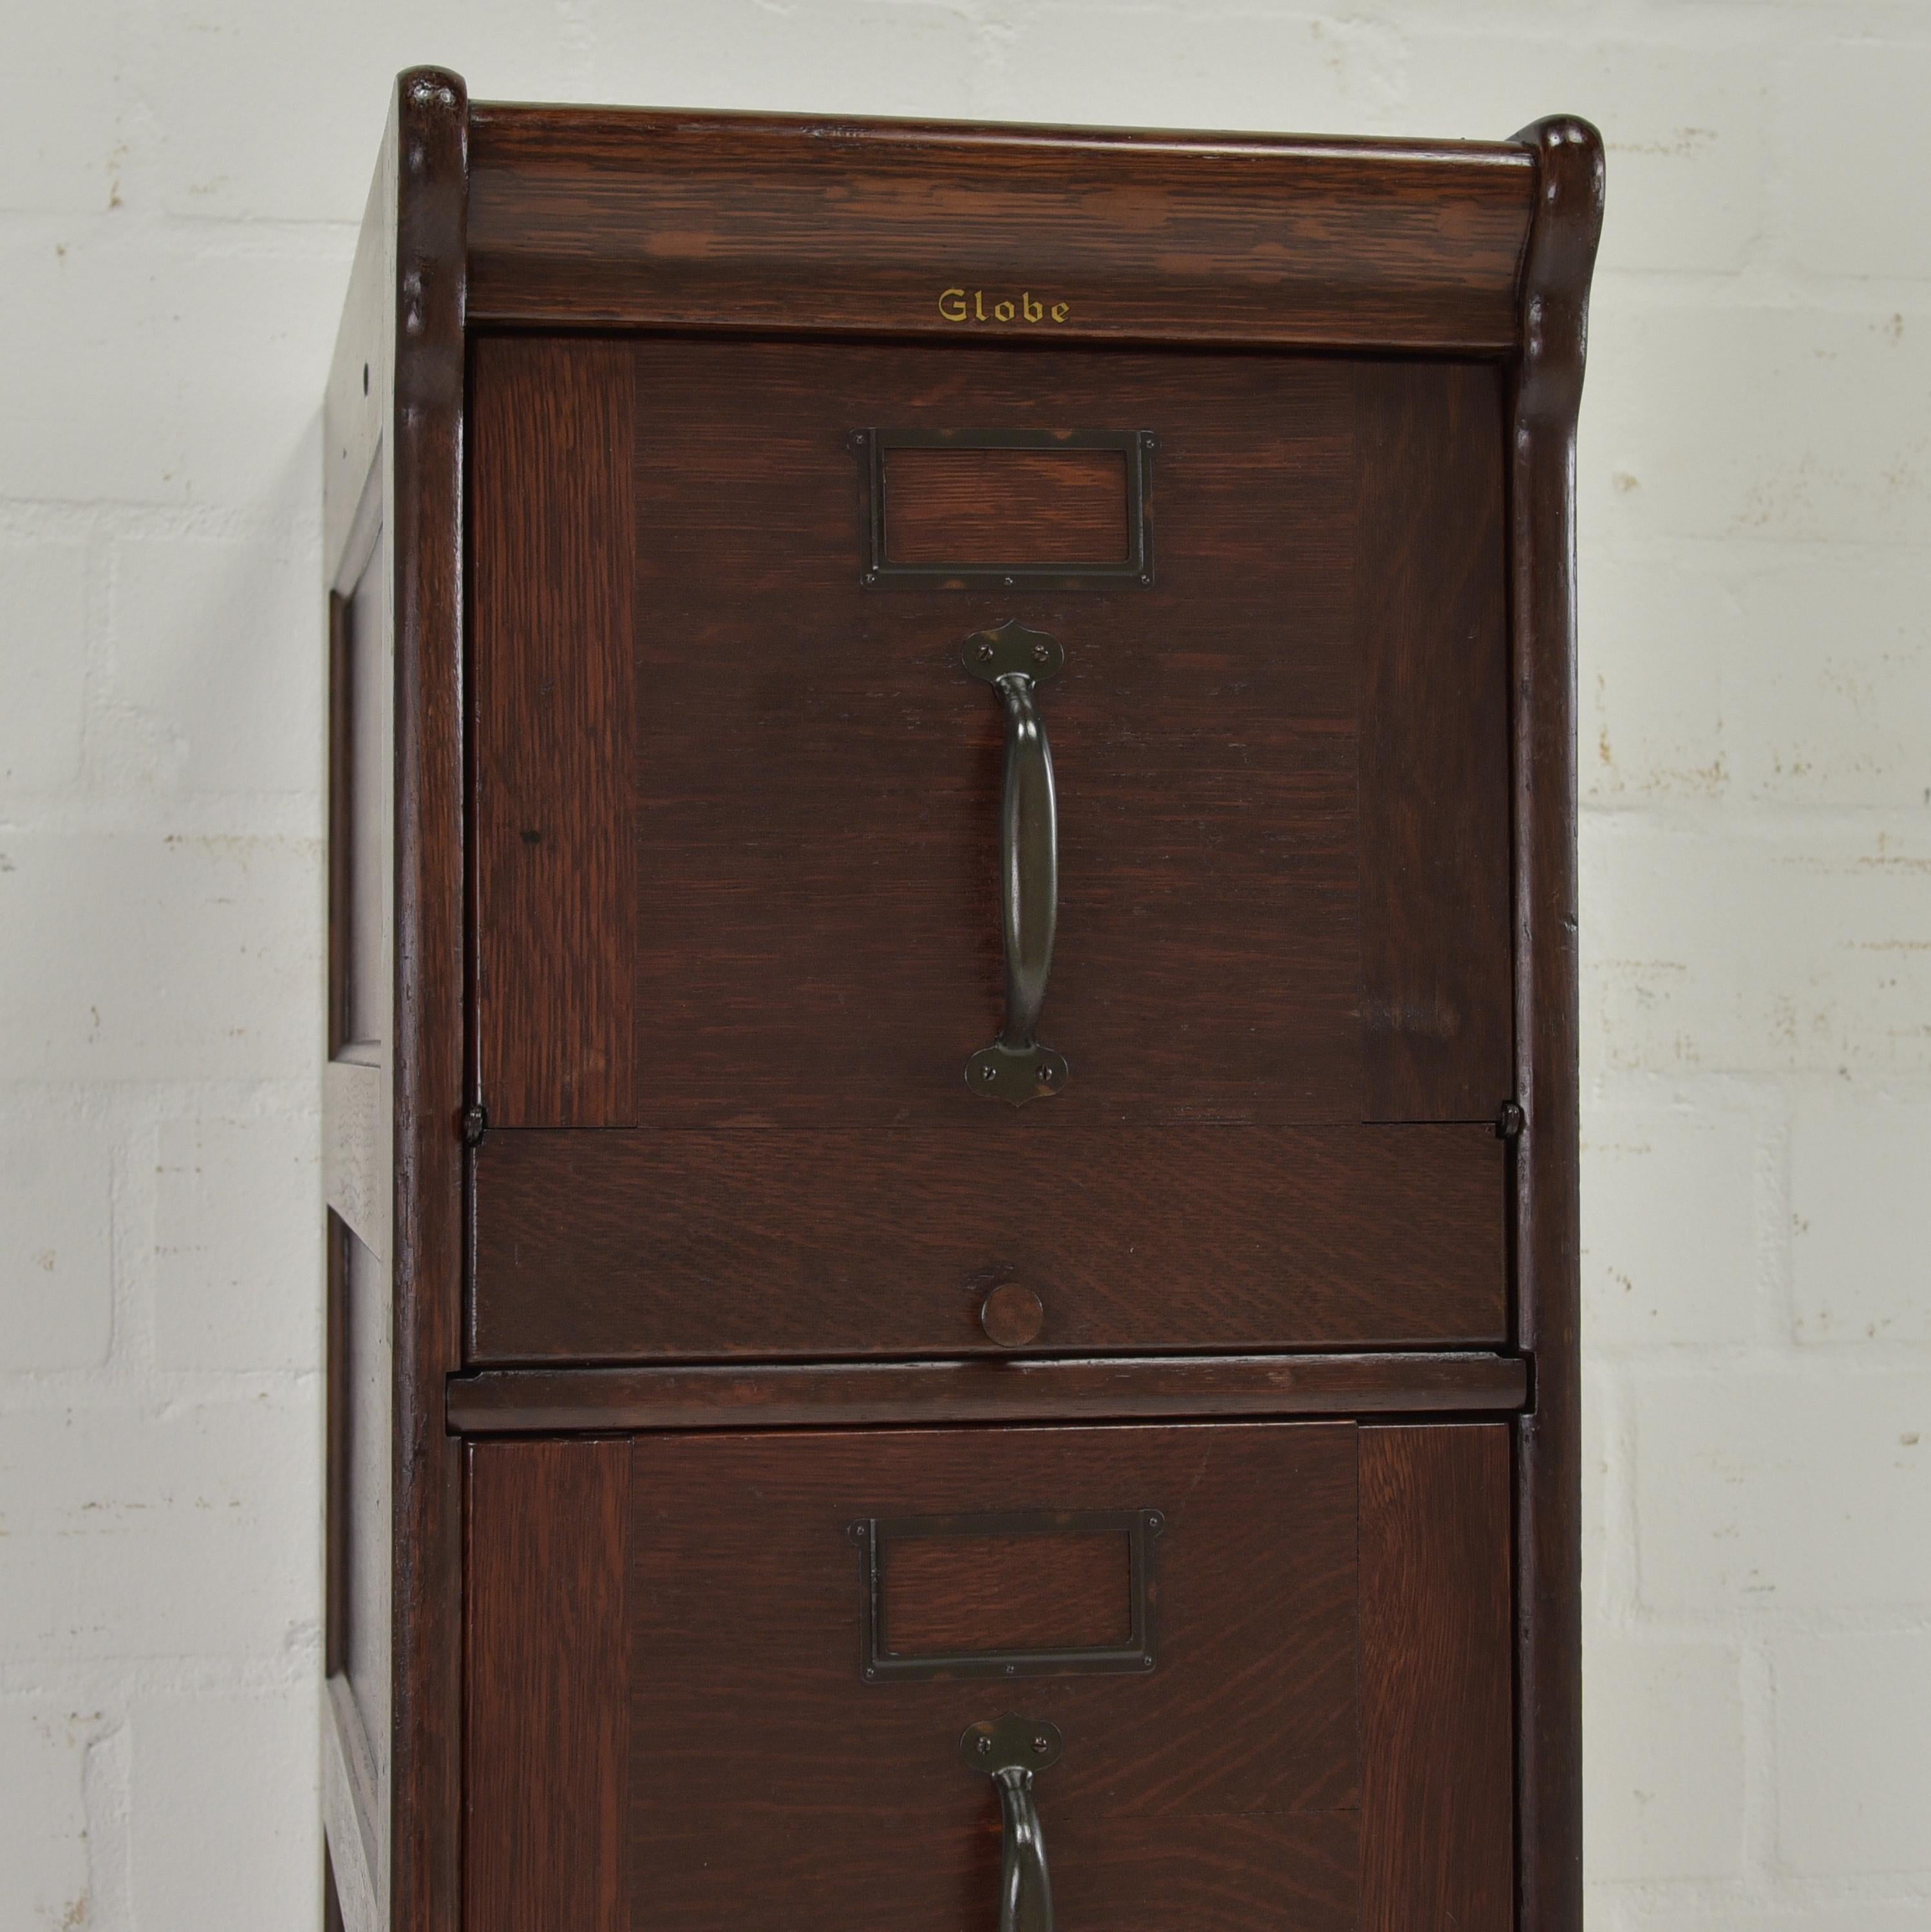 Early 20th Century 1930 restored Globe-Wernicke filing cabinet oak drawer cabinet antique For Sale